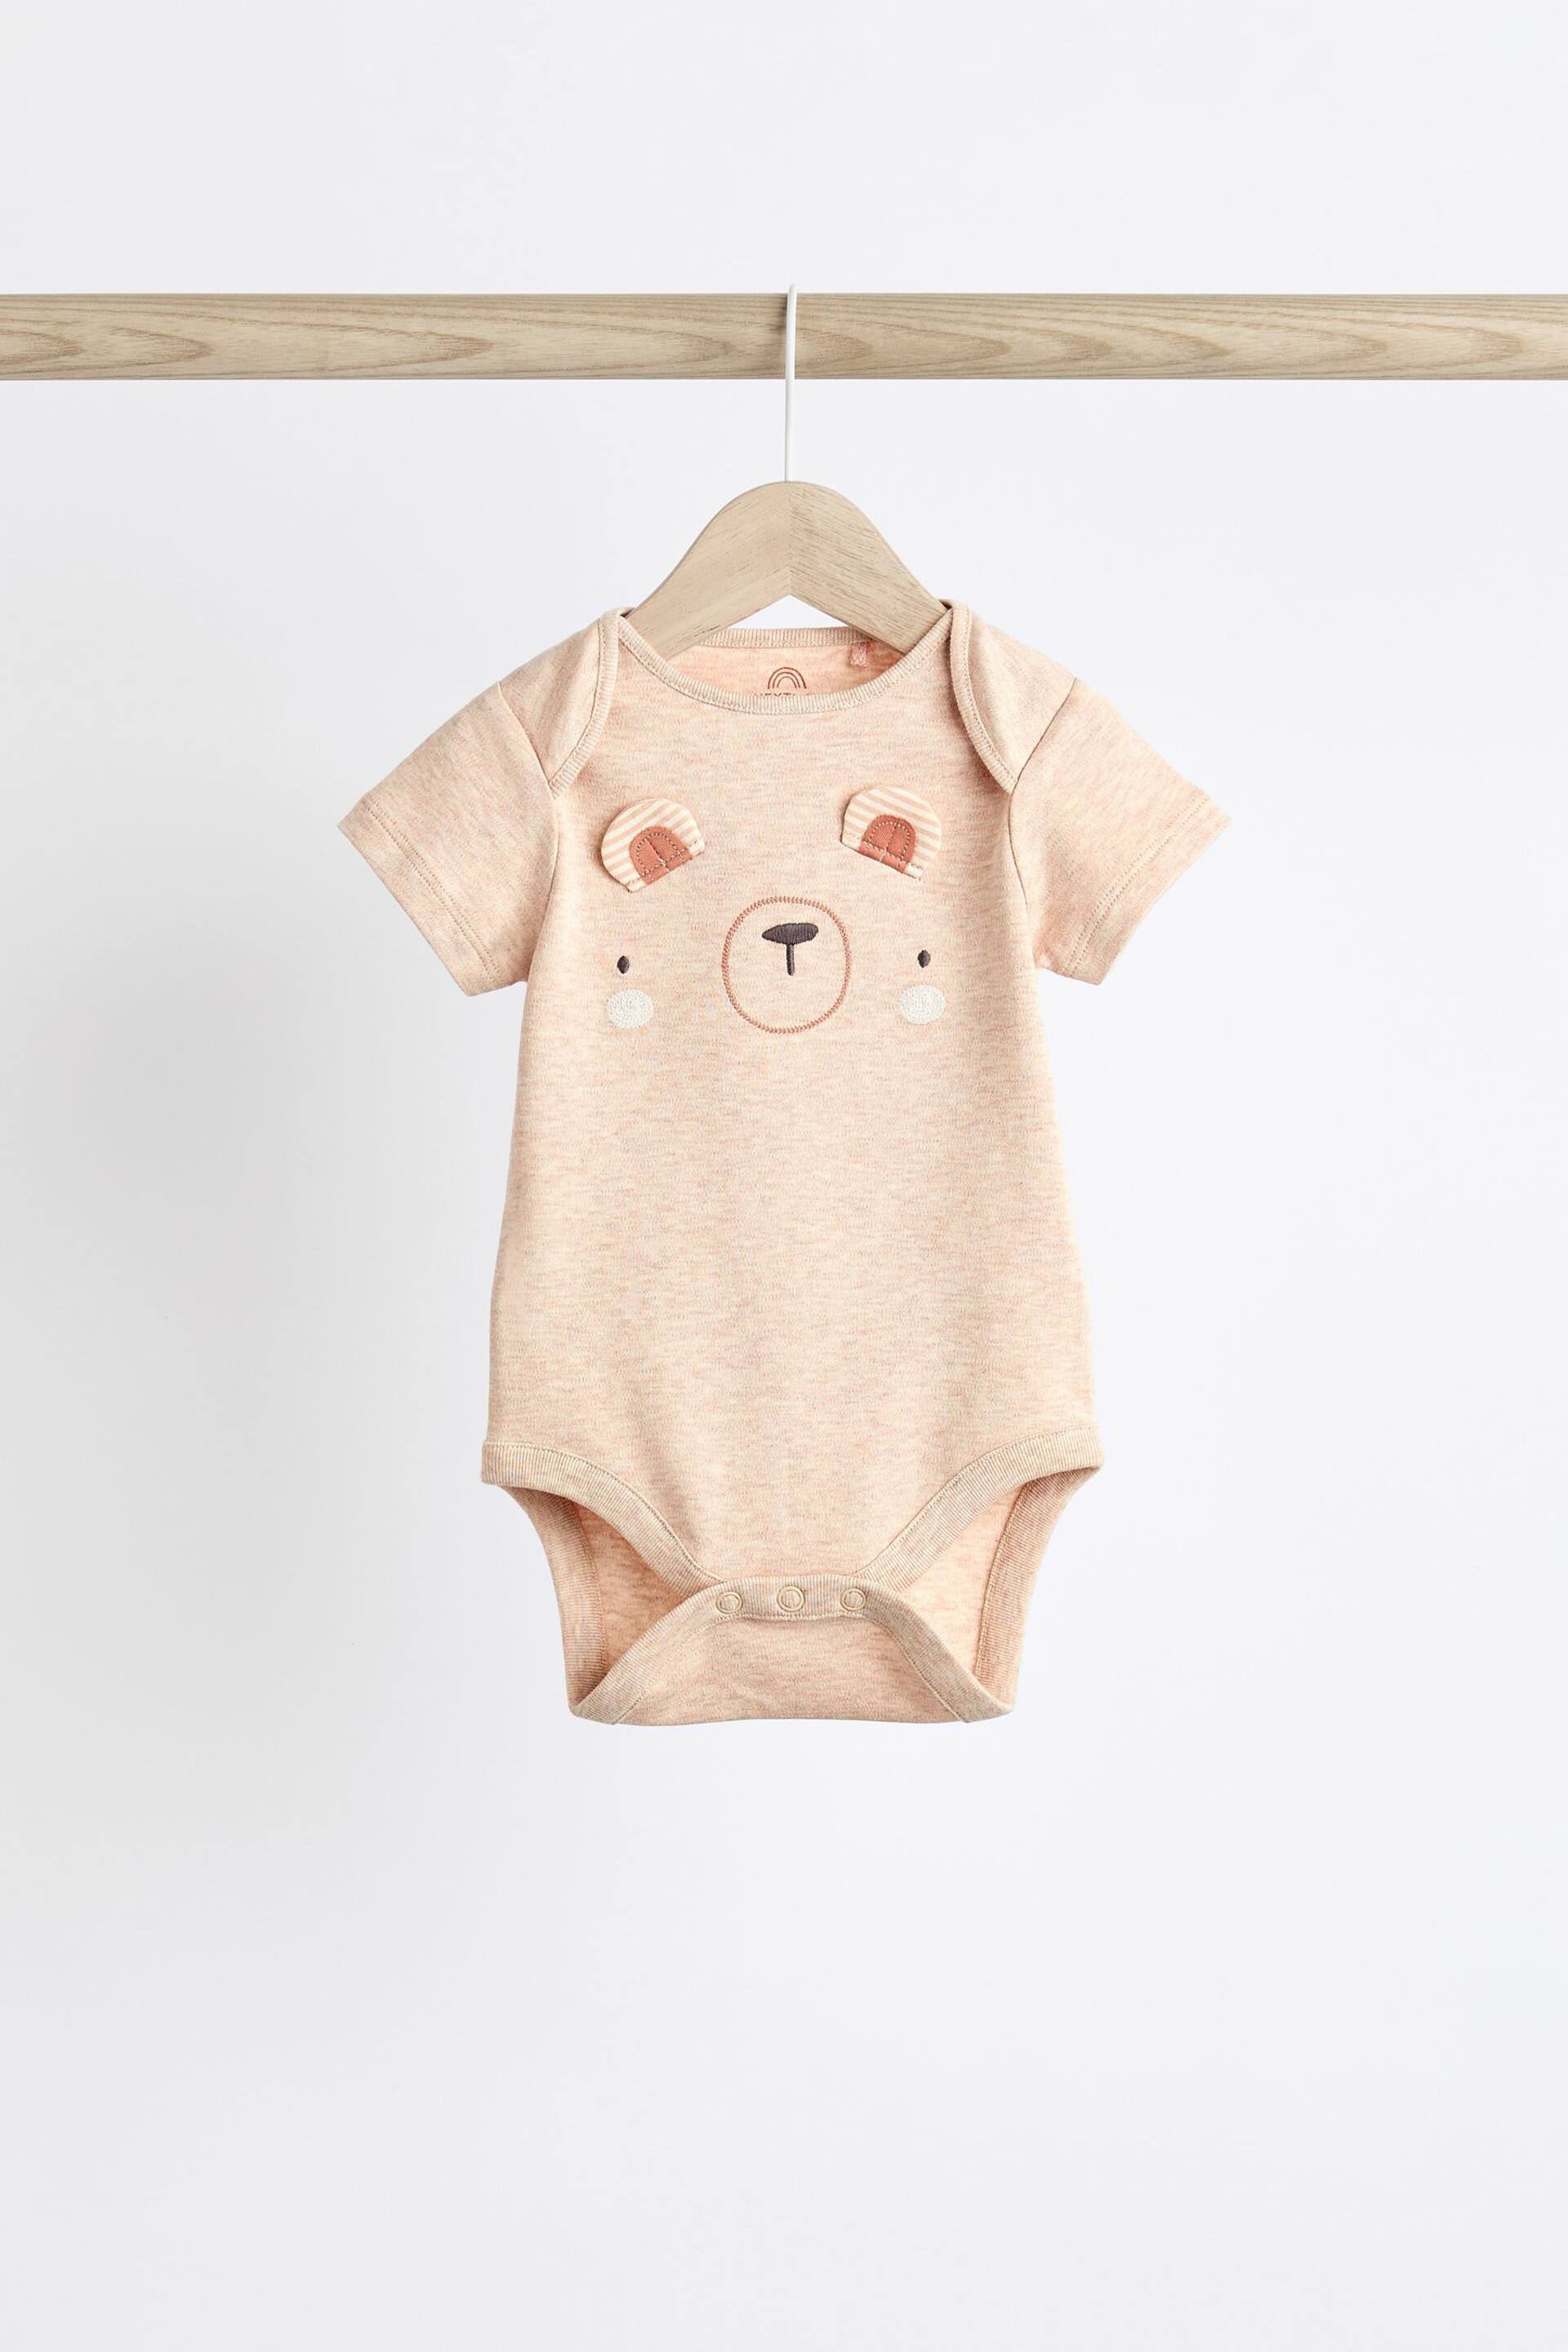 Neutral Bear Short Sleeve Baby Bodysuits 3 Pack - Image 2 of 10